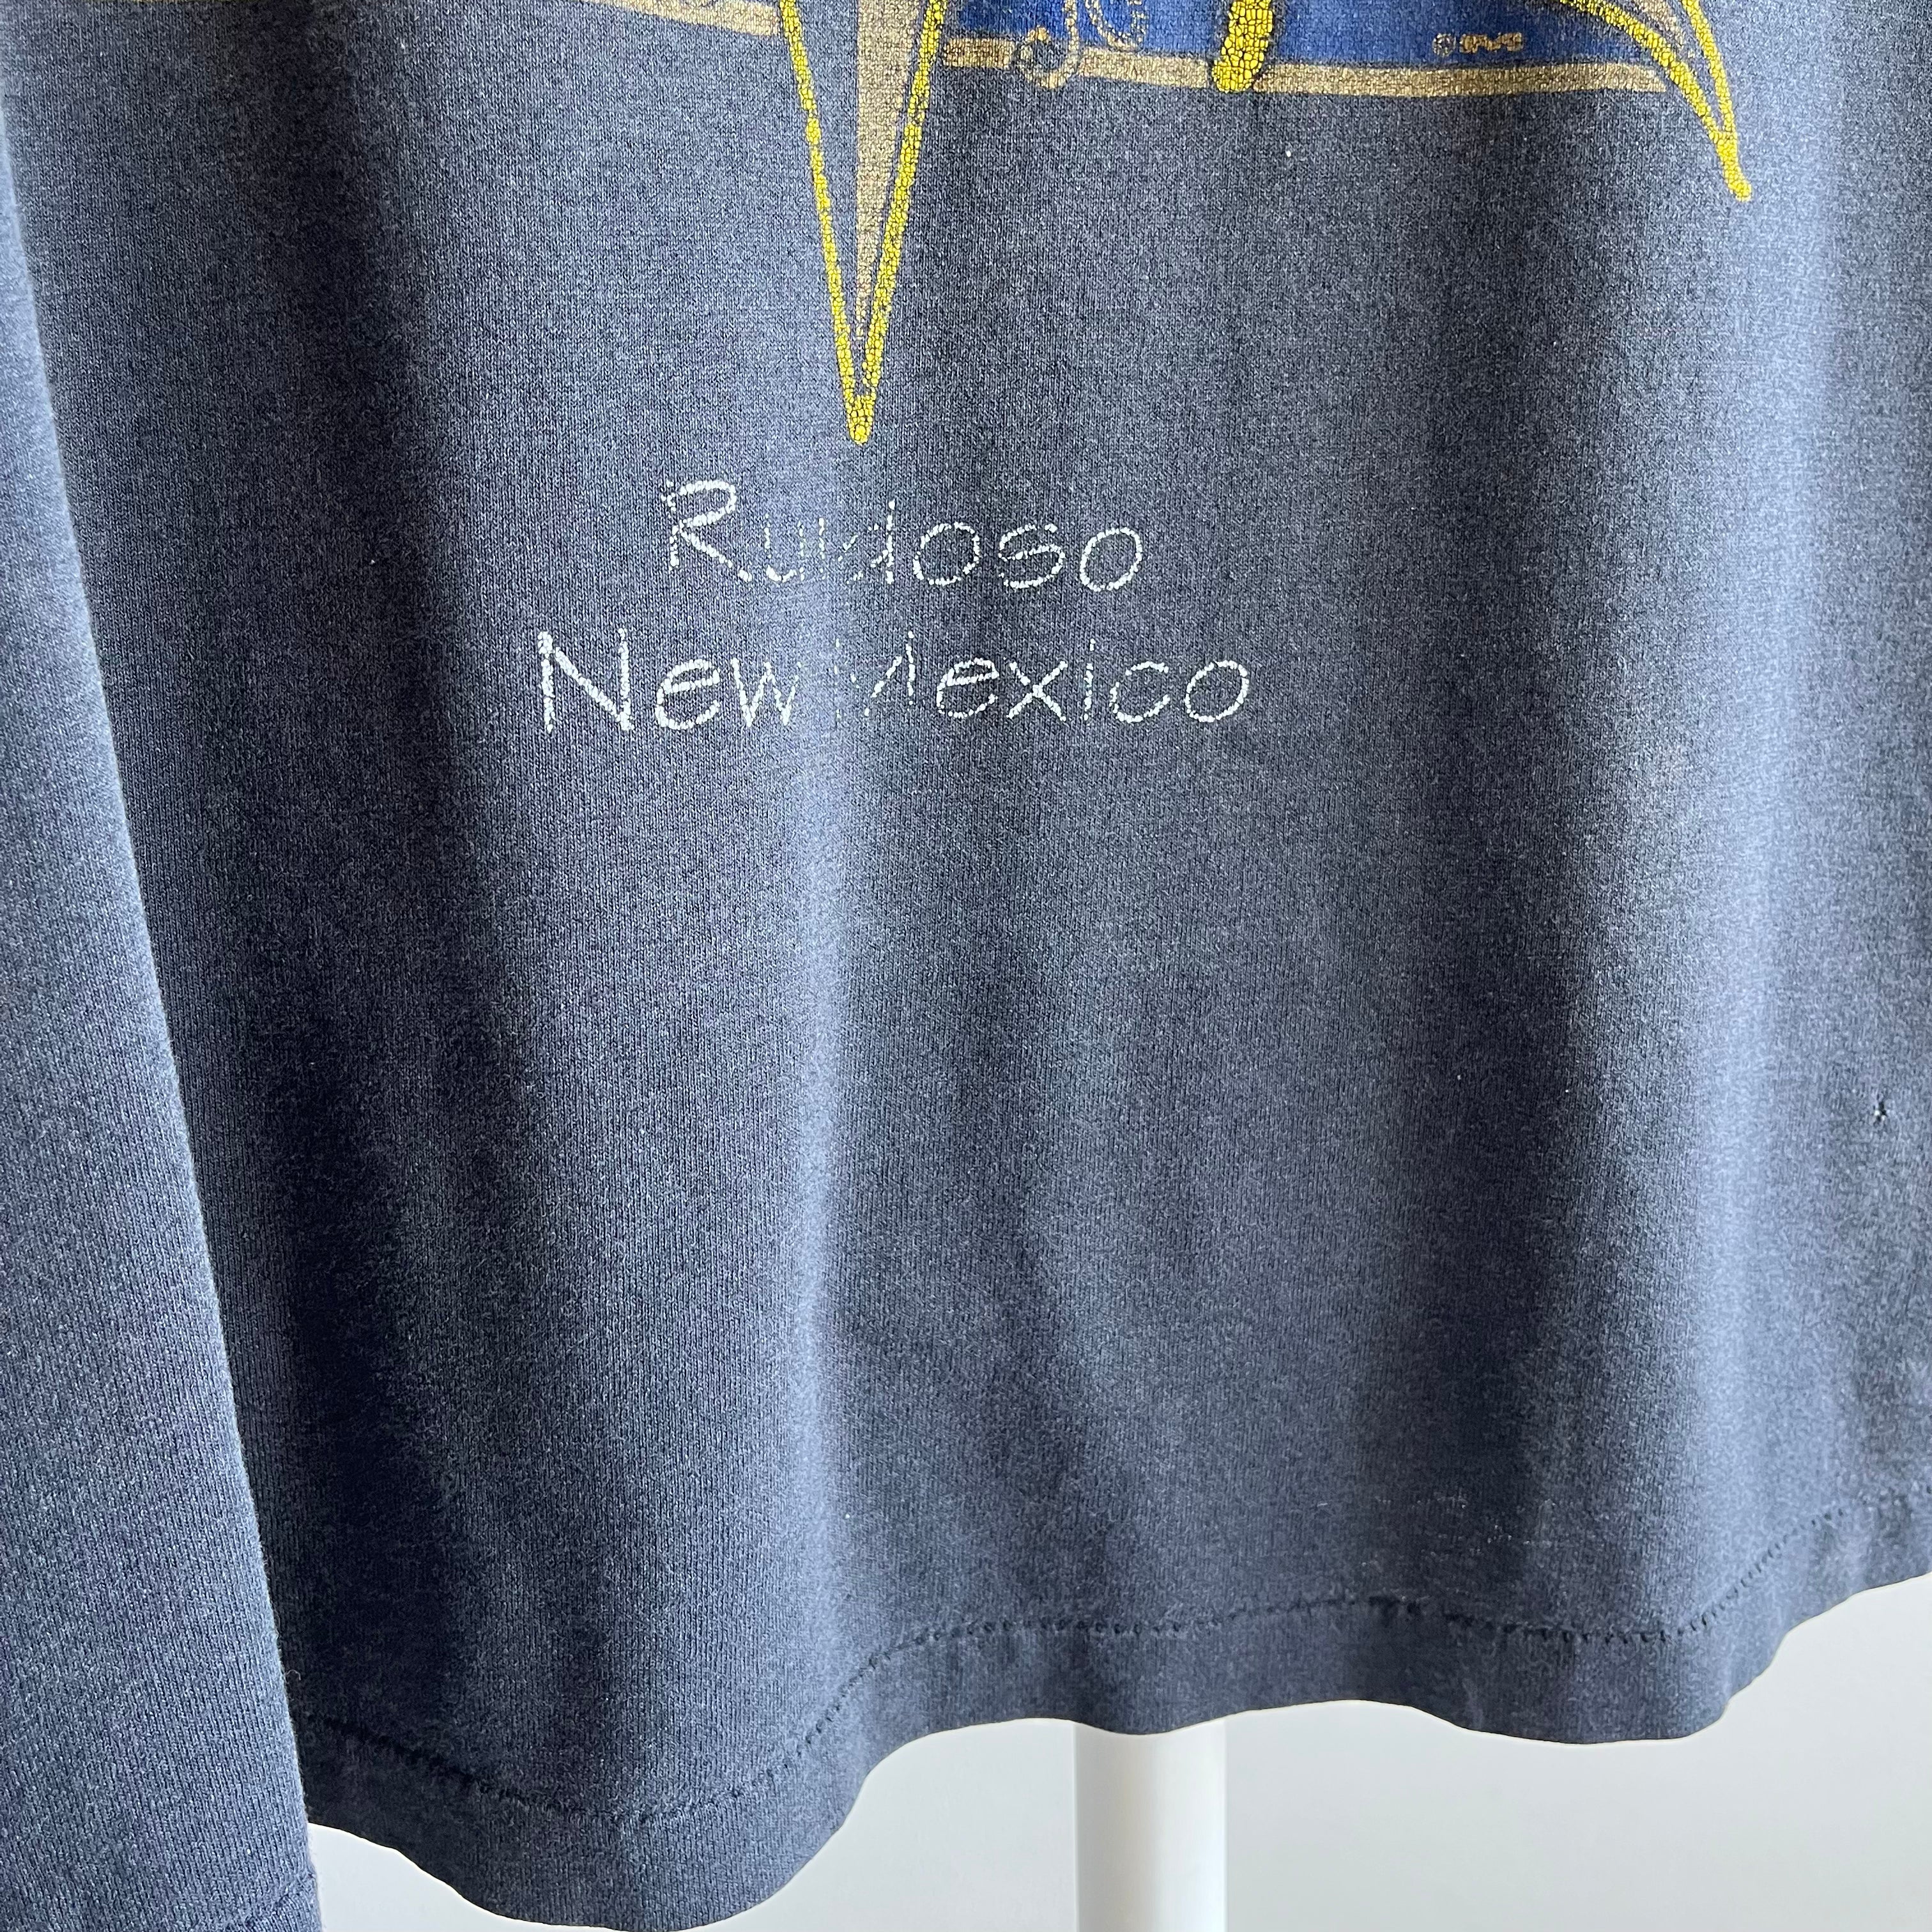 1990s Ruidoso New Mexico Perfectly Faded and Worn 50/50 T-Shirt